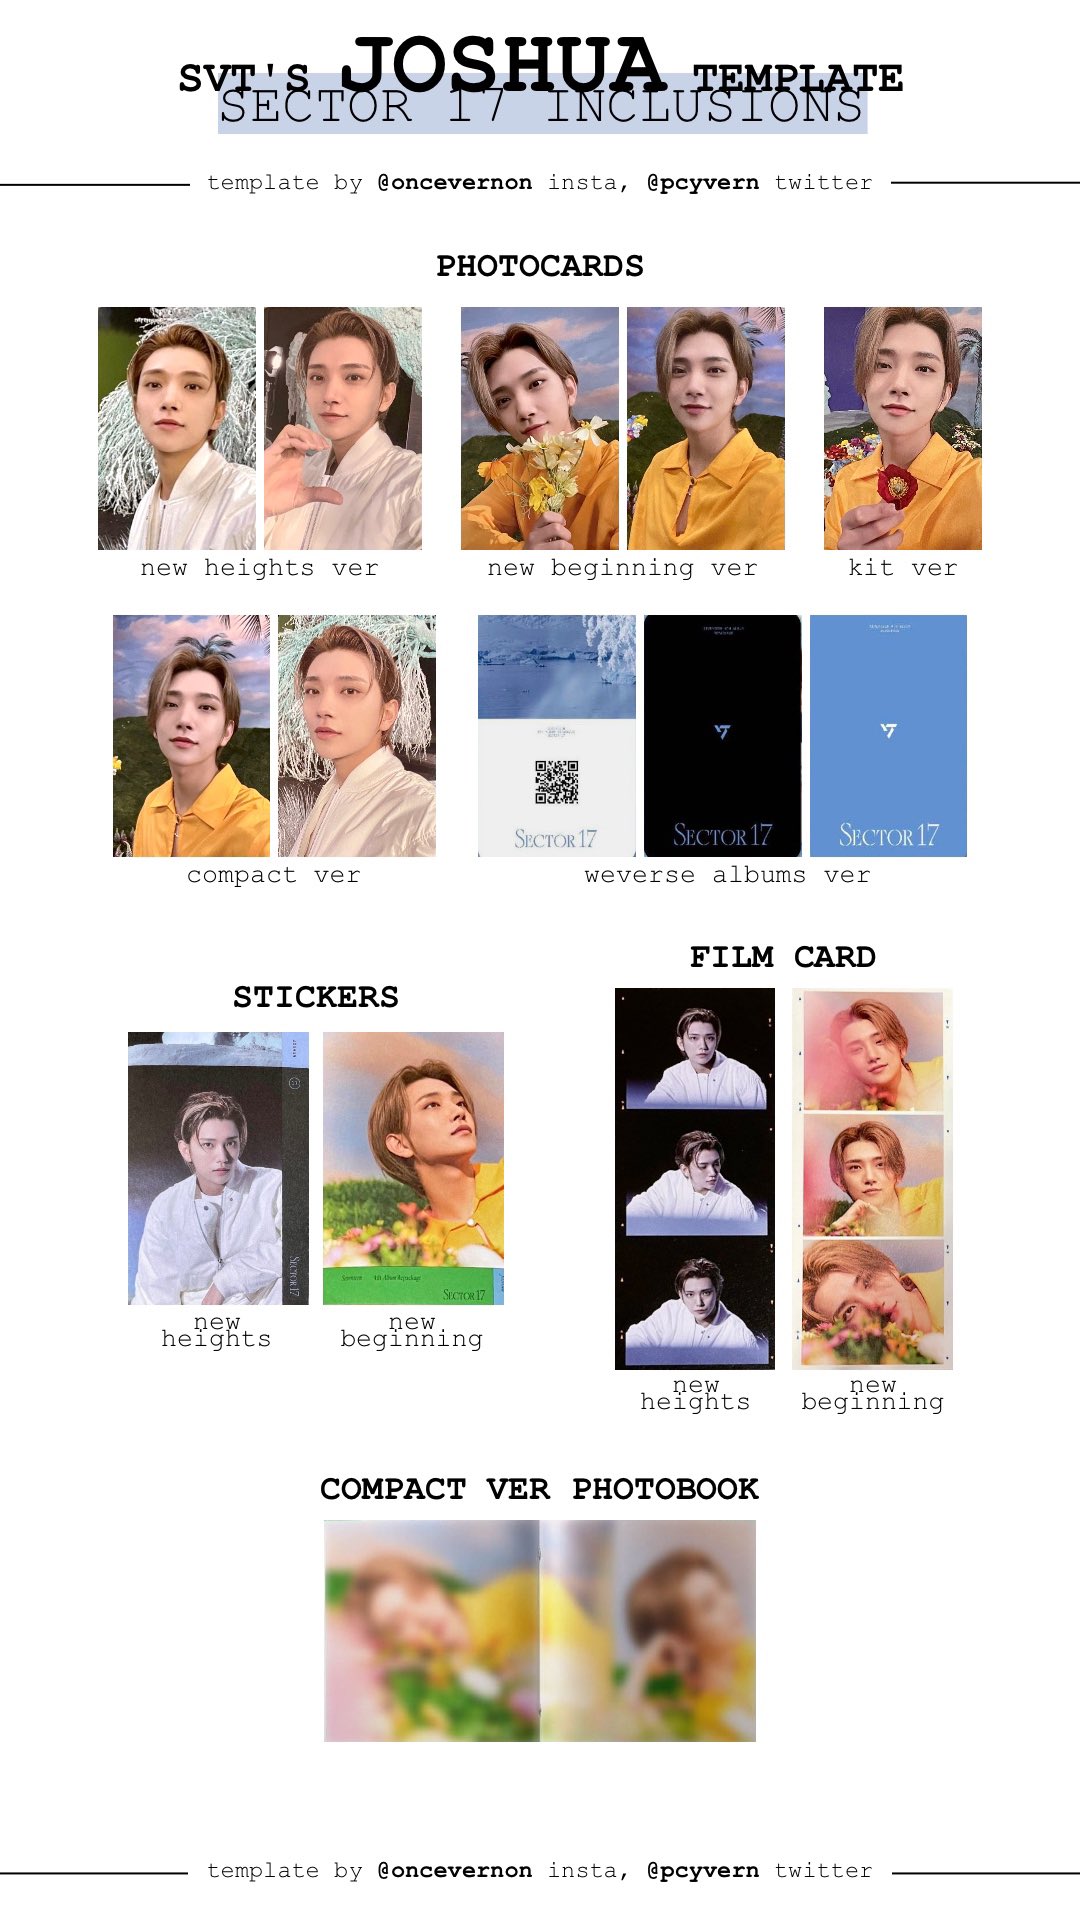 bella on Twitter "ot13 templates for seventeen sector 17 non photocard